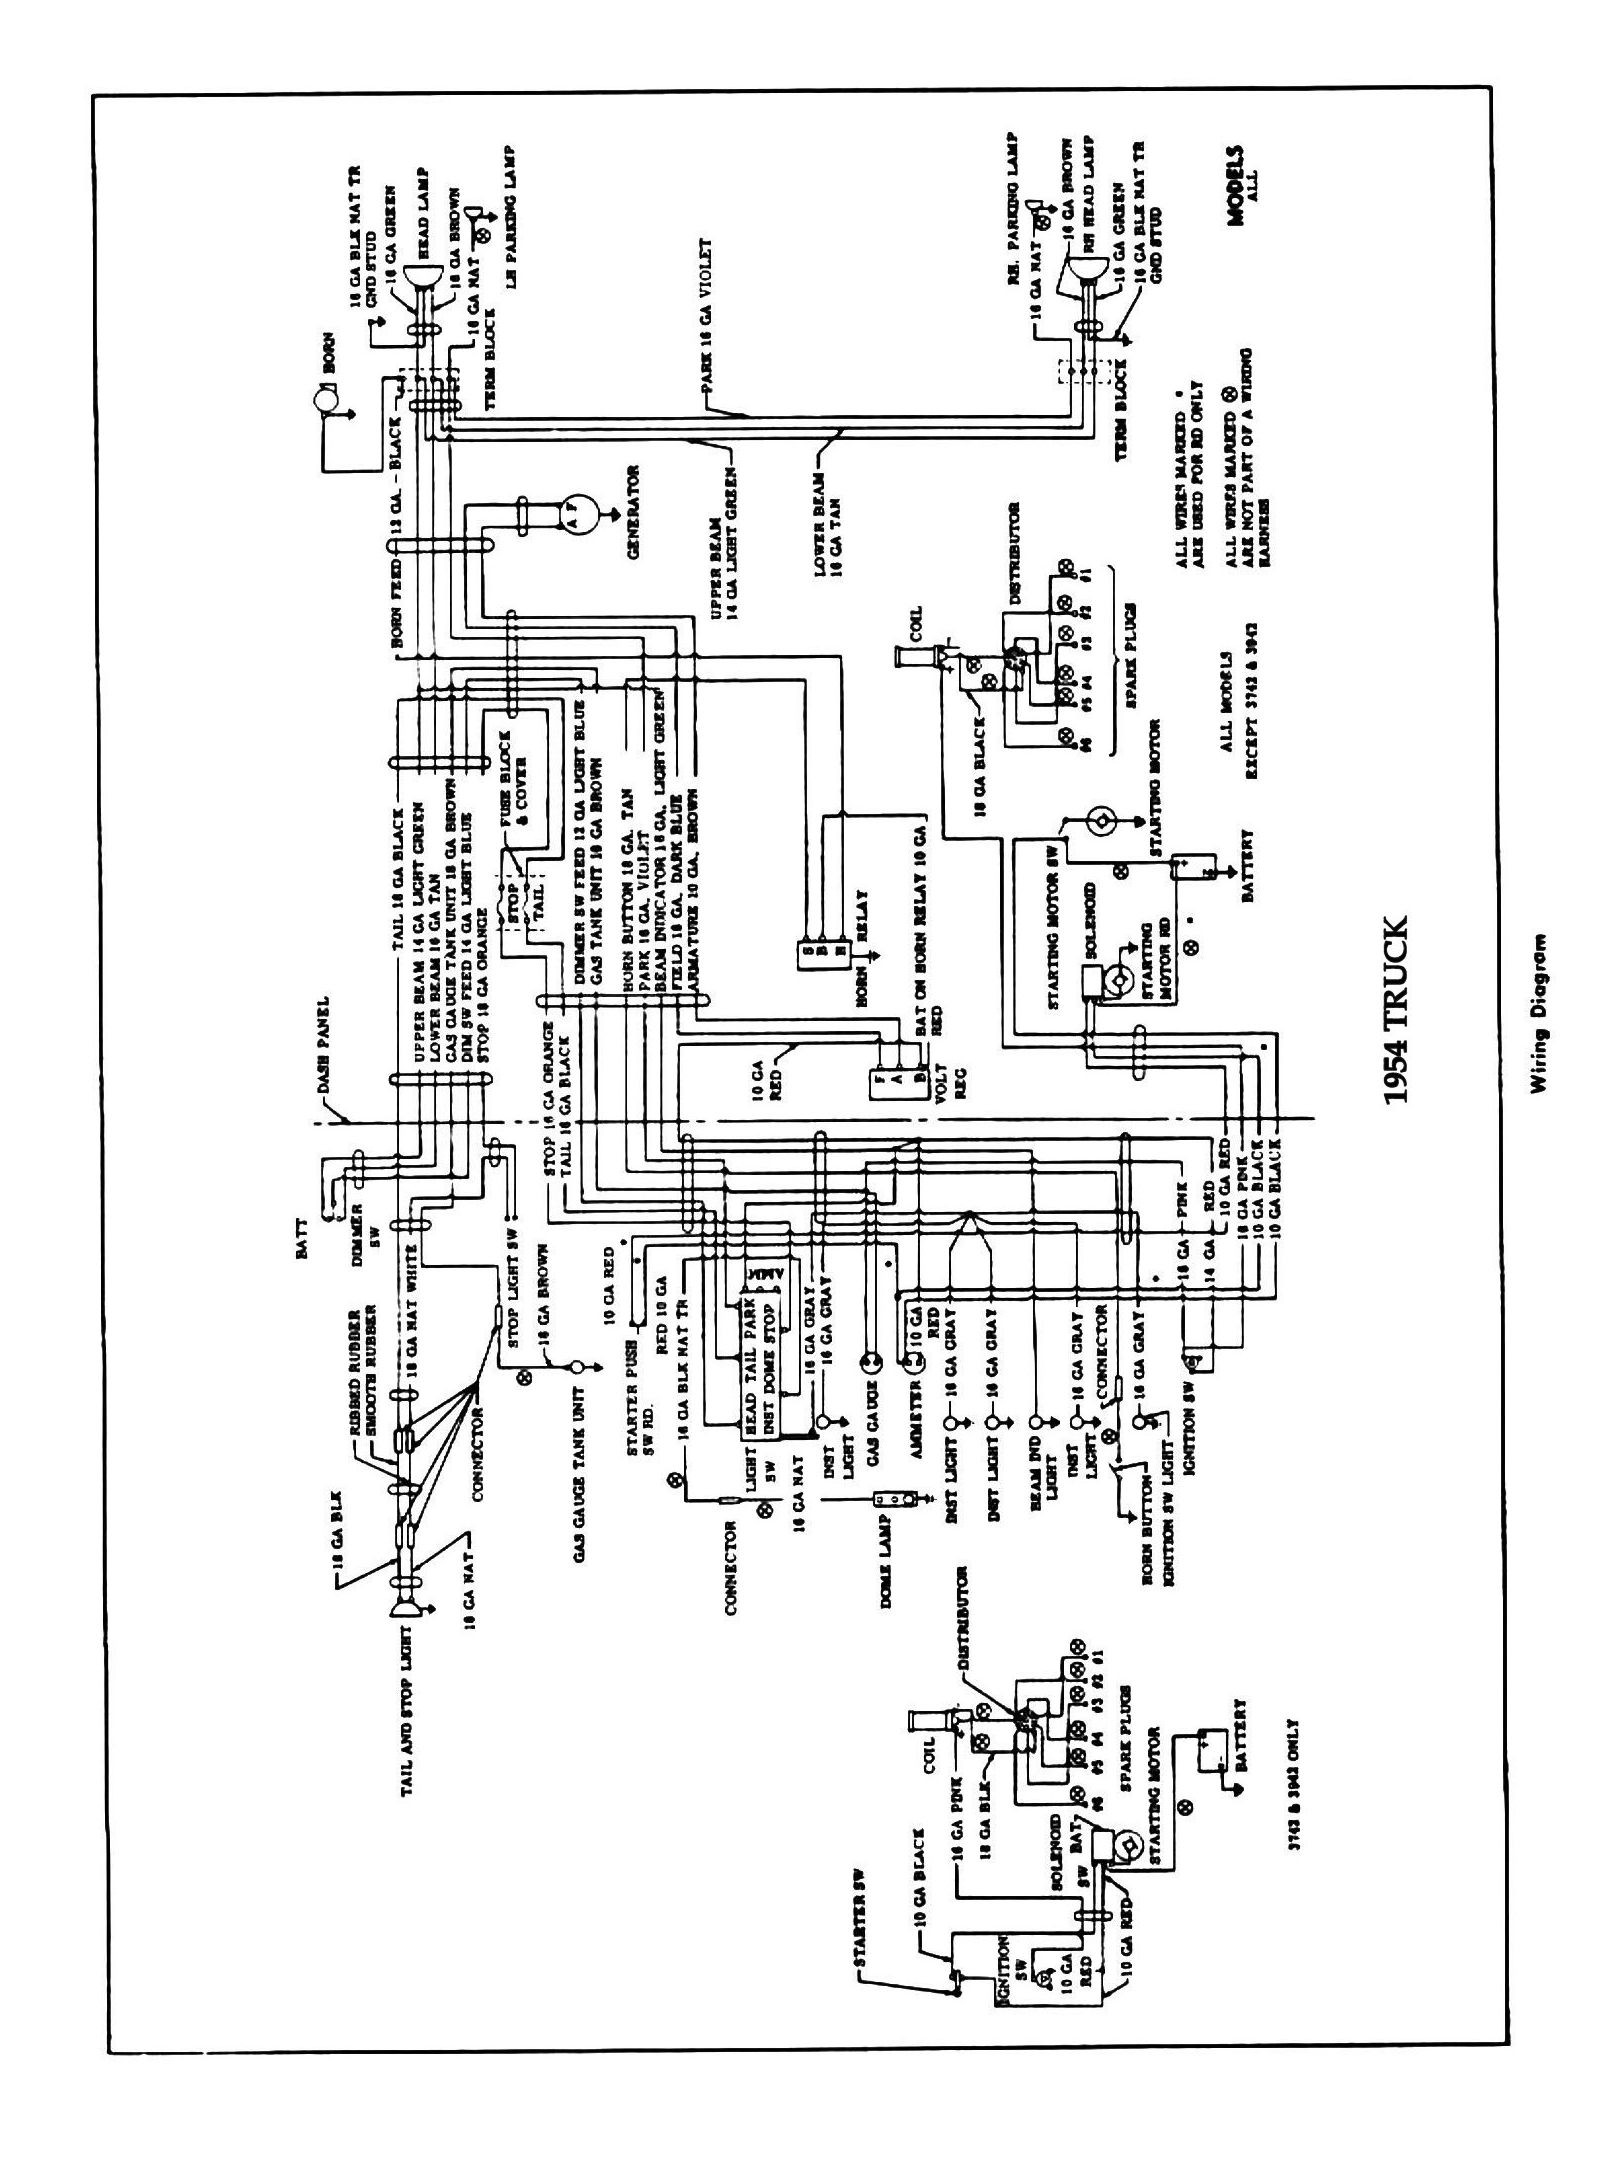 Wiring Diagram For Chevy Pickup